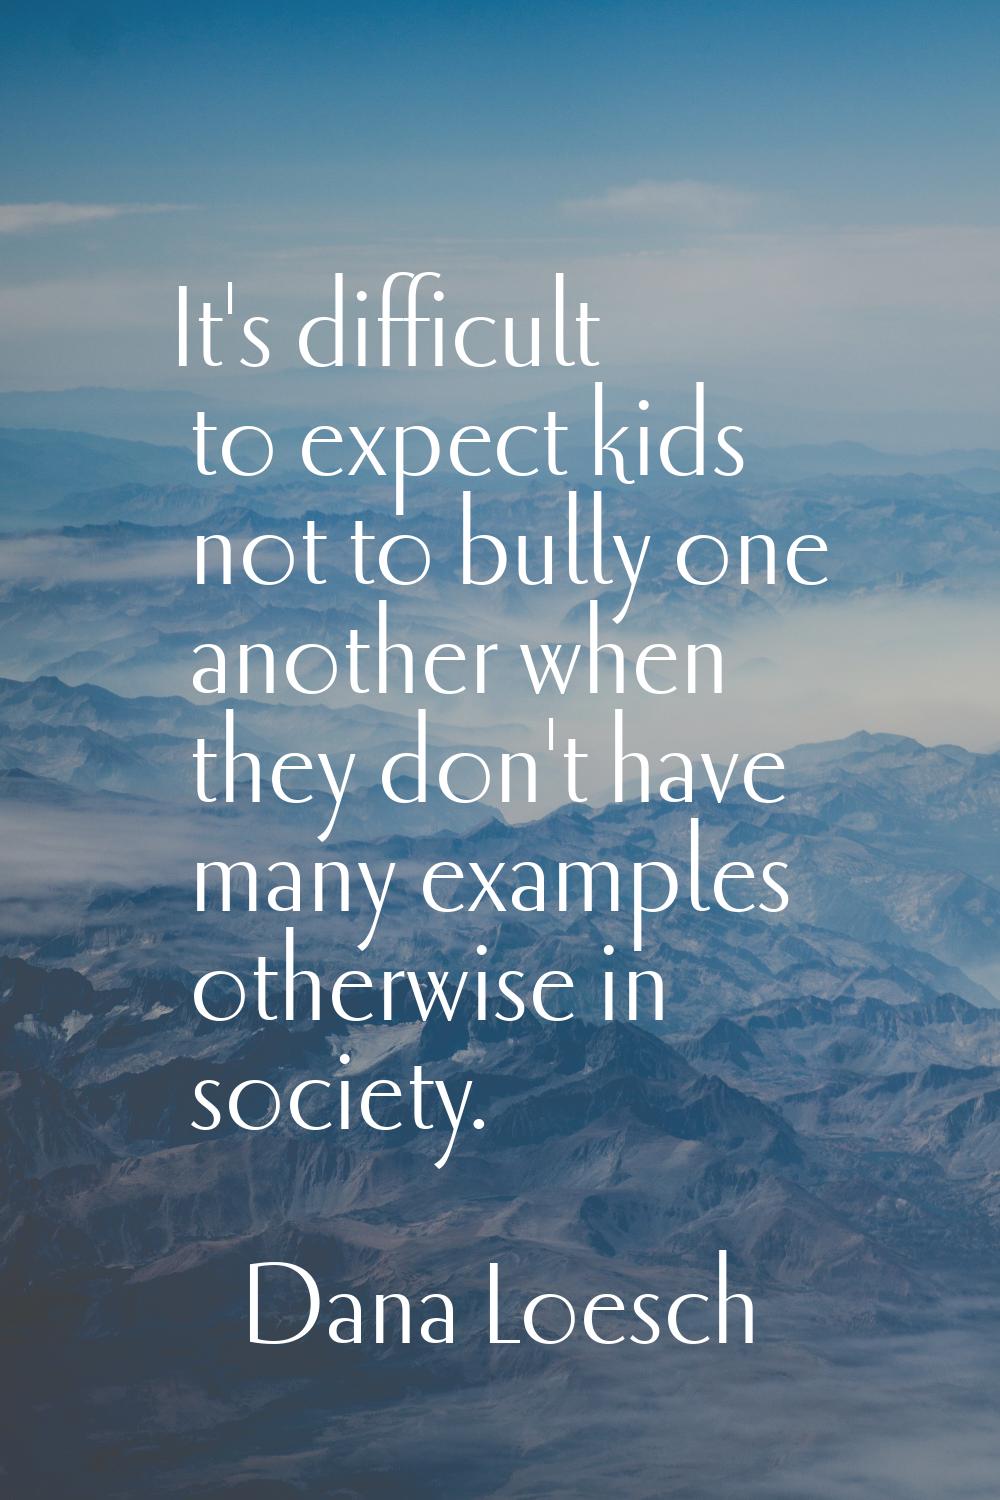 It's difficult to expect kids not to bully one another when they don't have many examples otherwise